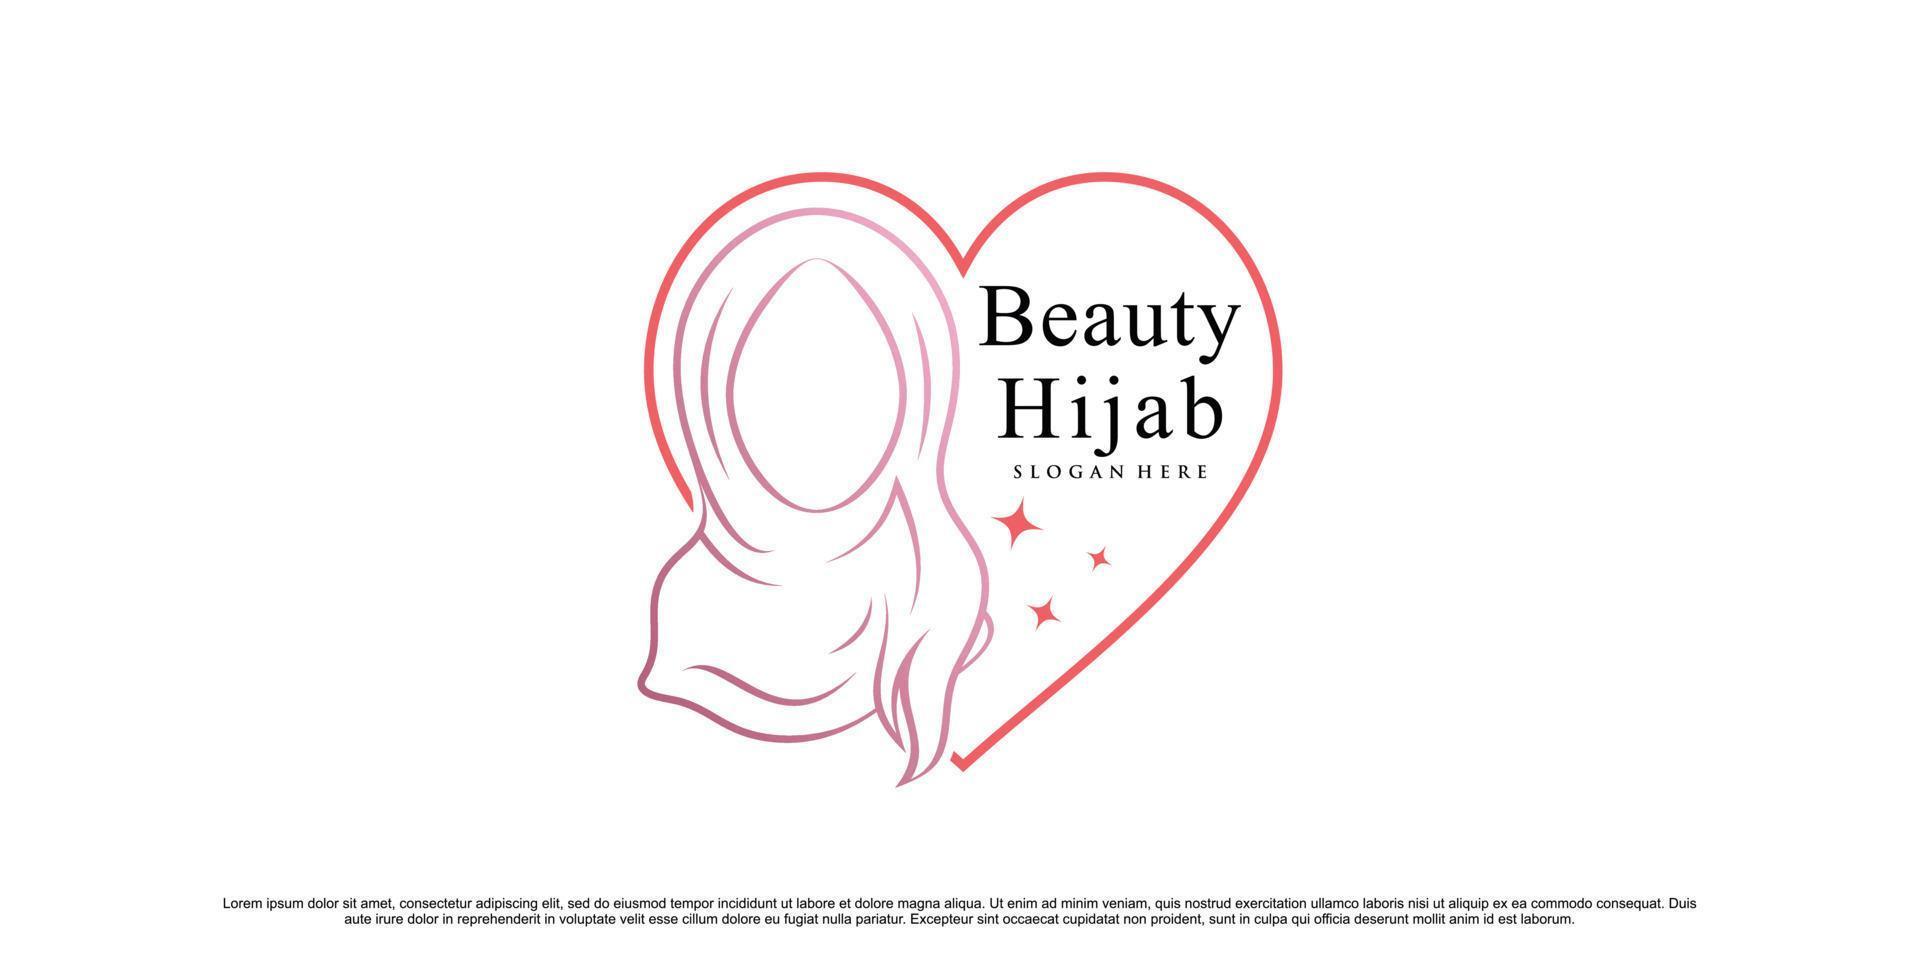 Beauty hijab or hijab store logo for moslem woman with creative element Premium Vector